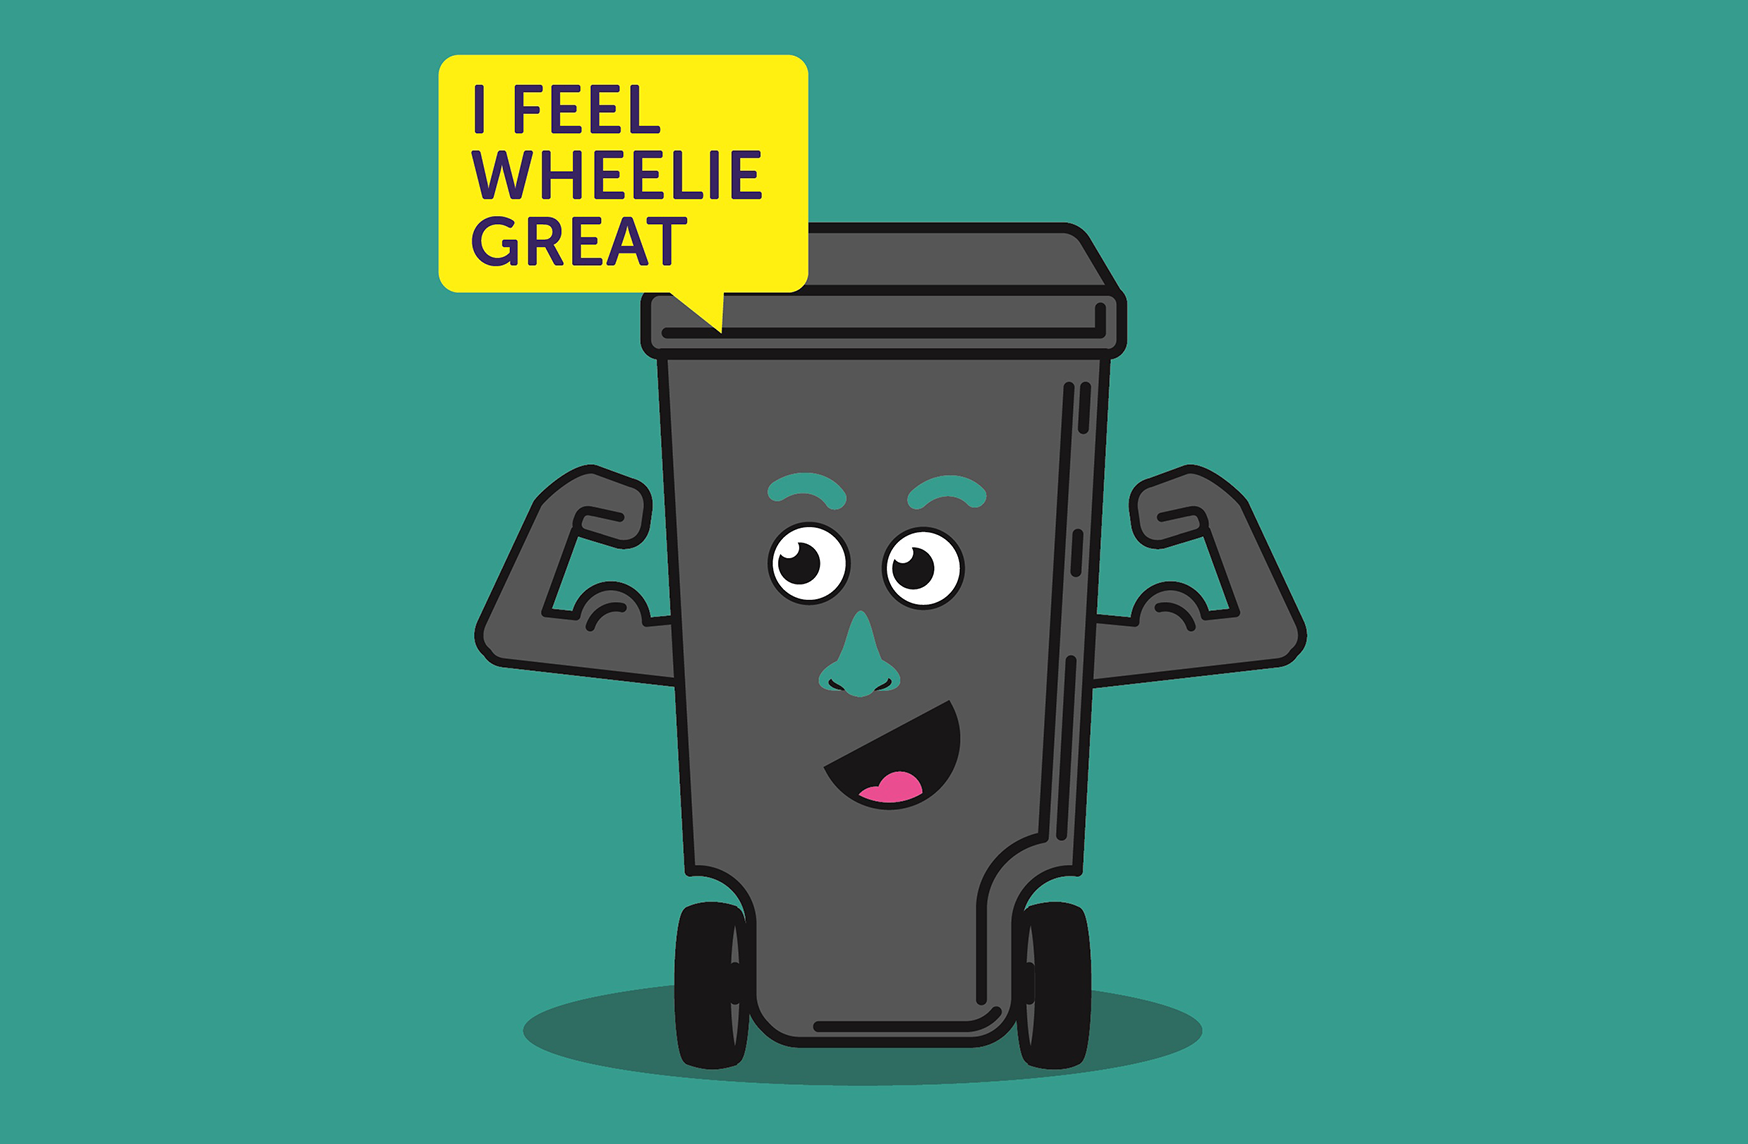 A graphic of a bin with a smiling face and strong arms